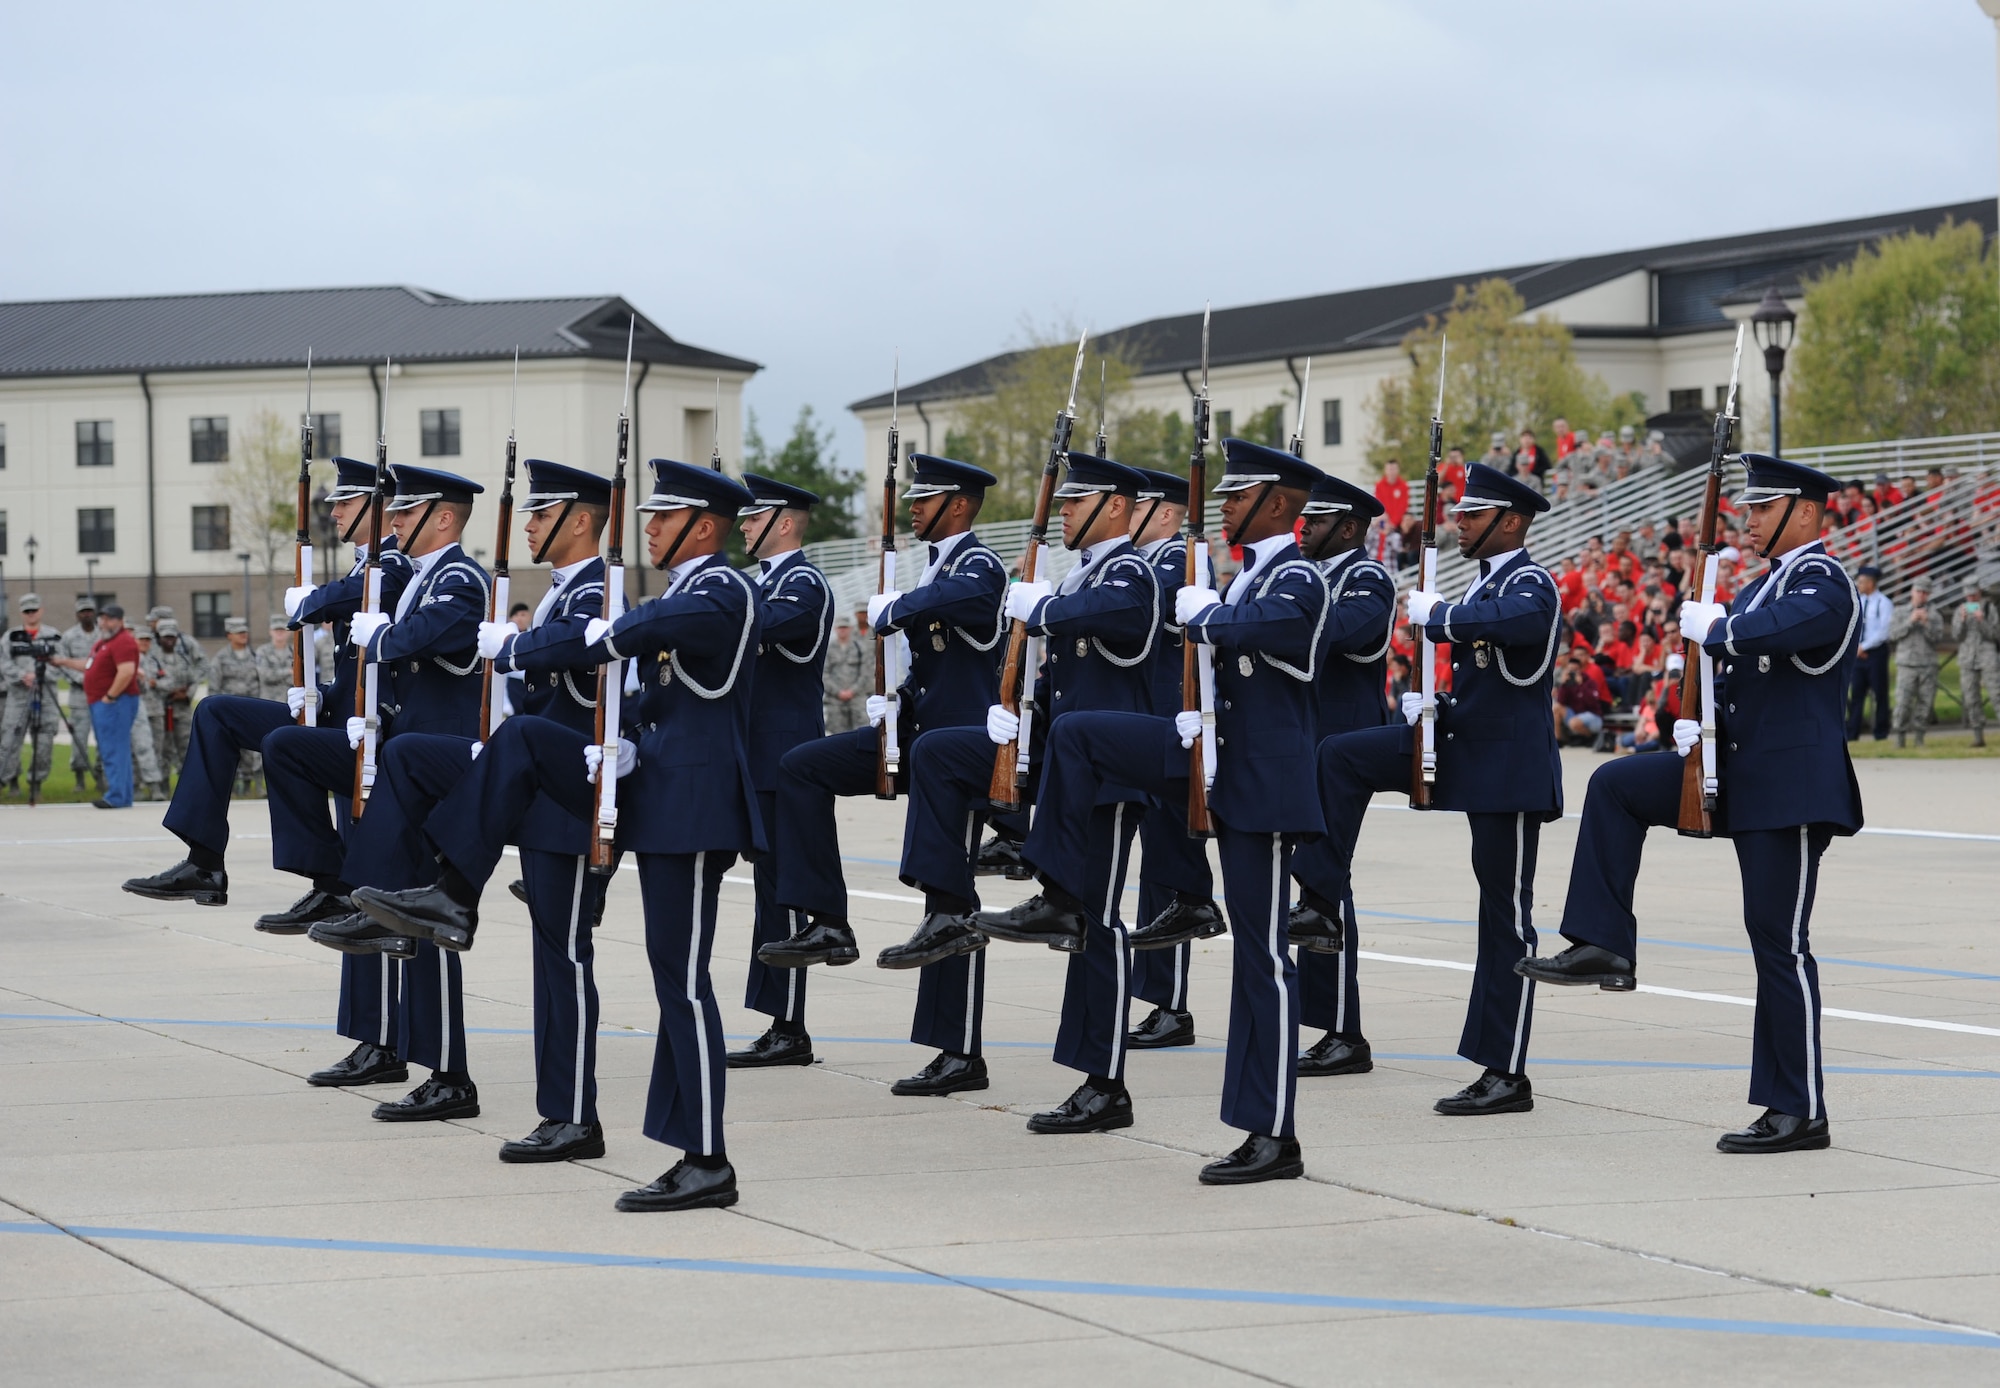 The U.S. Air Force Honor Guard Drill Team deputes their 2017 routine during the 81st Training Group drill down at the Levitow Training Support Facility drill pad March 10, 2017, on Keesler Air Force Base, Miss. The team comes to Keesler every year for five weeks to develop a new routine that they will use throughout the year. (U.S. Air Force photo by Kemberly Groue)